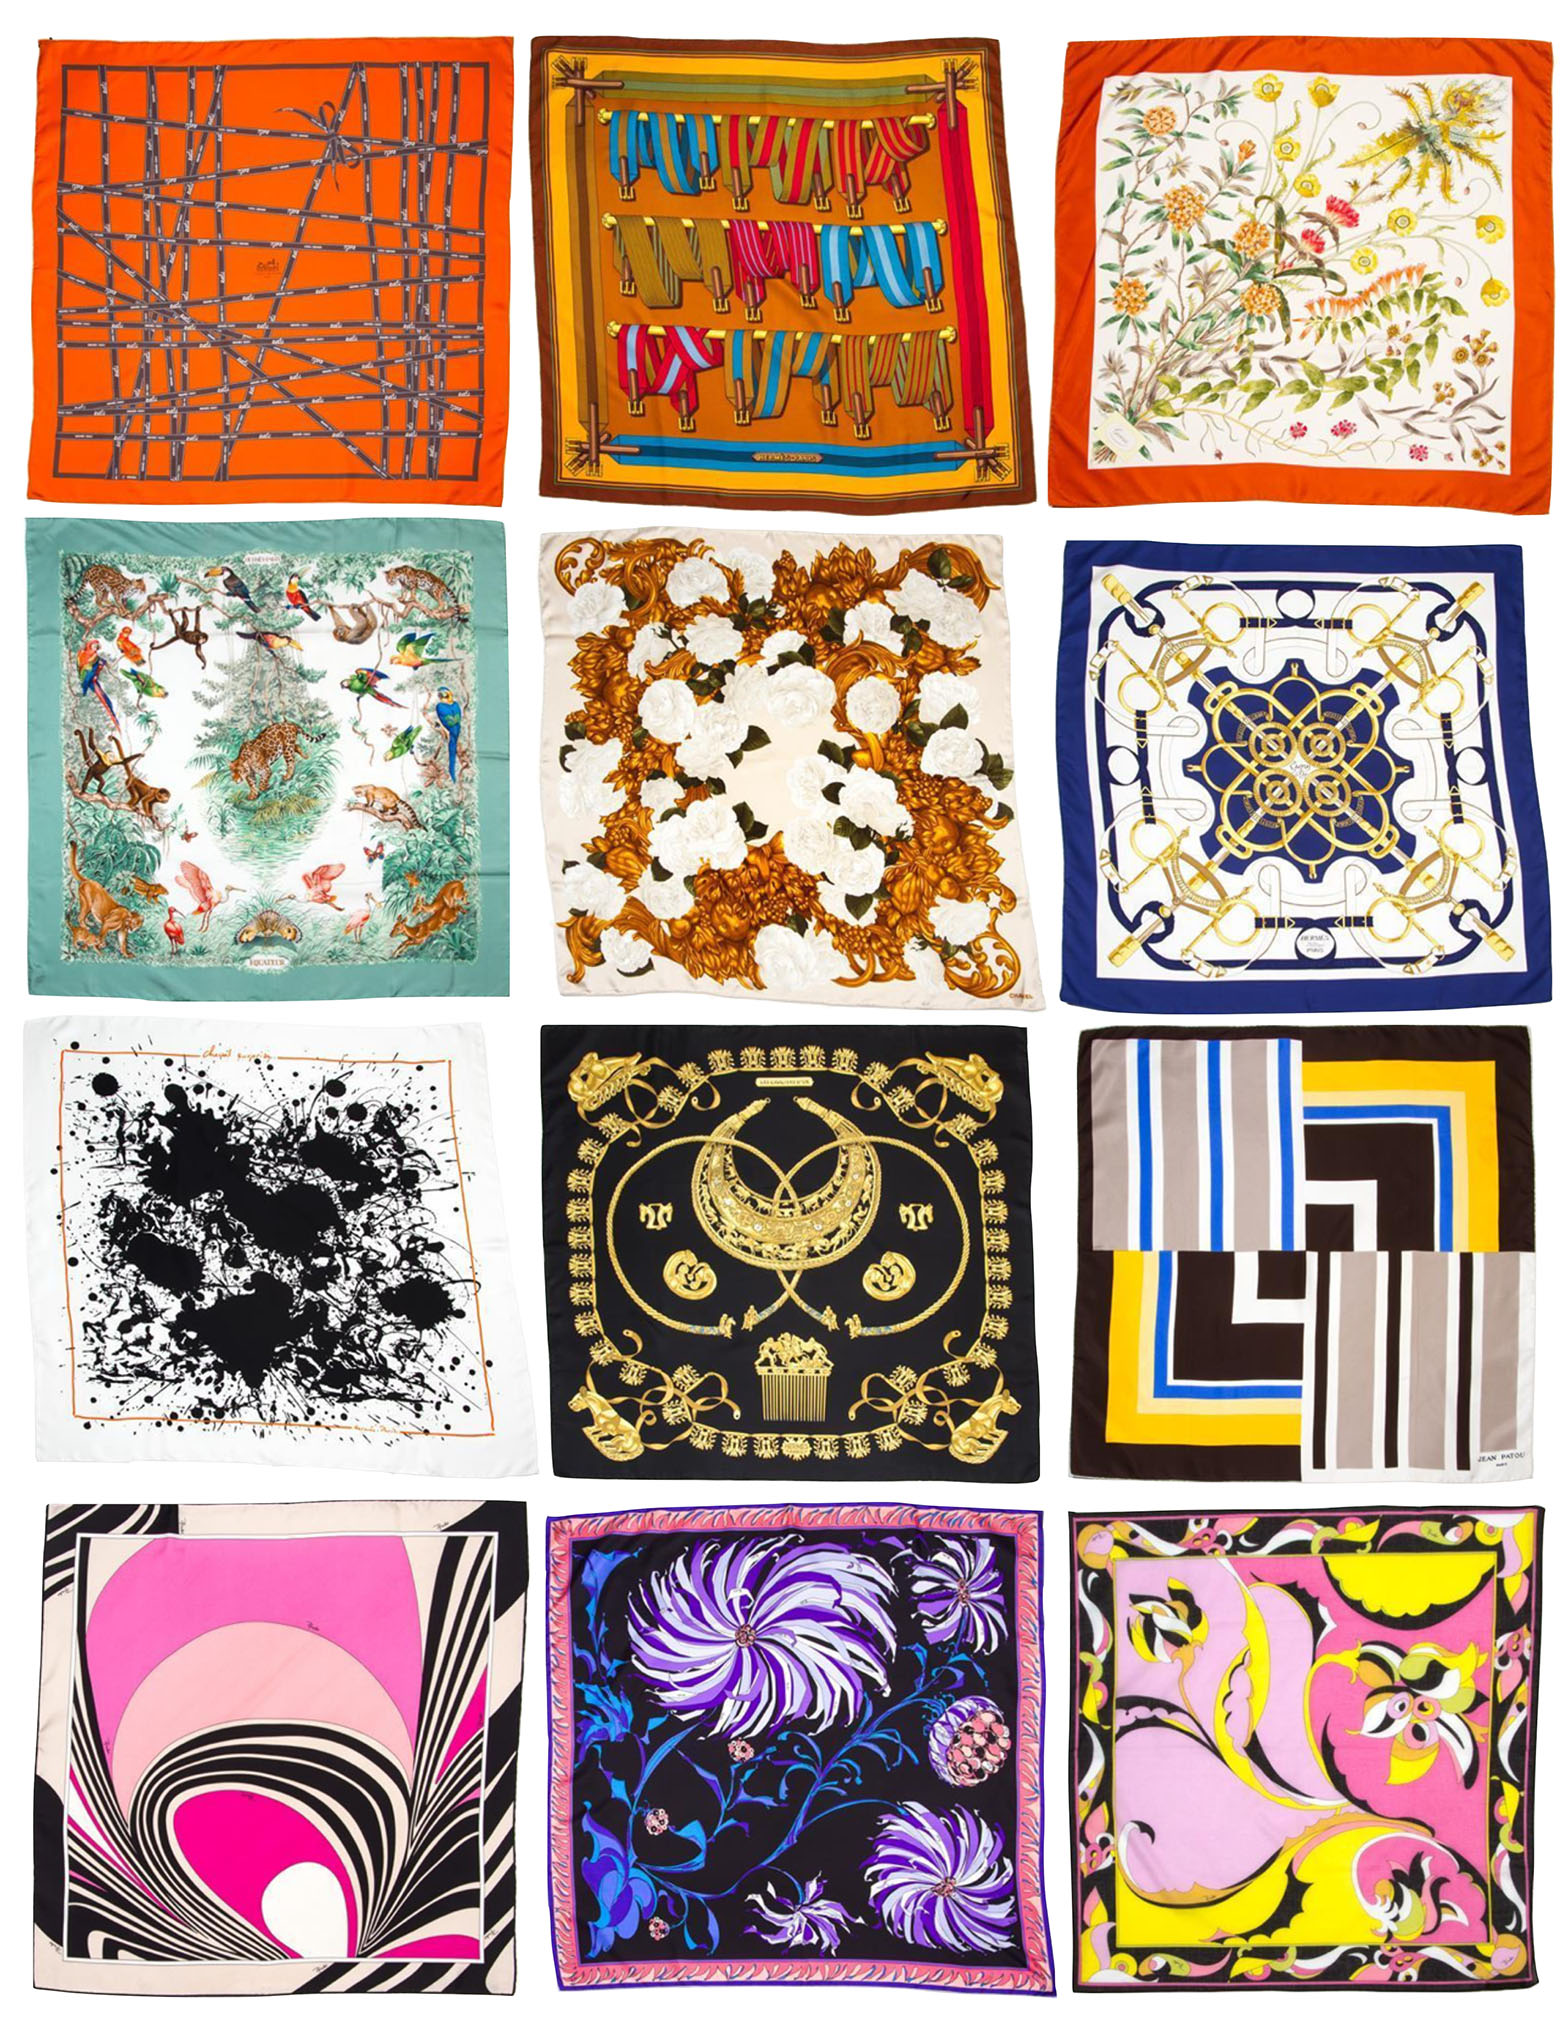 Hermes, Chanel, Gucci and Pucci scarves for sale on BidSquare, use scarves as wall art